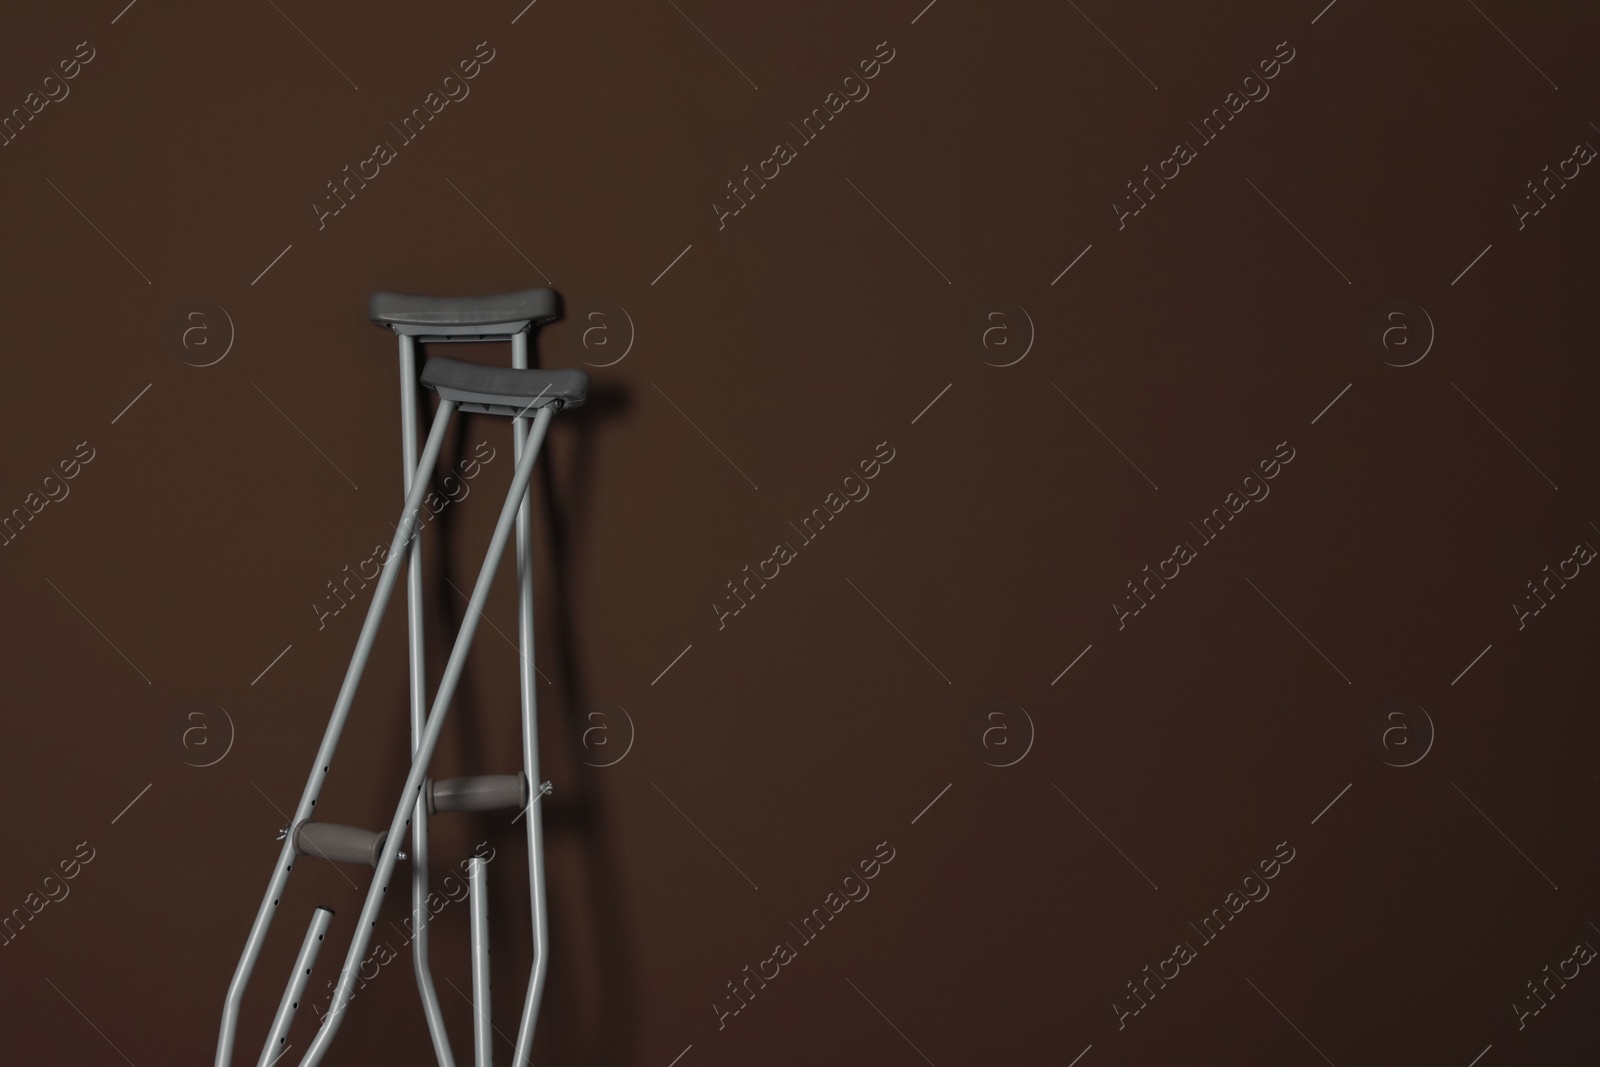 Photo of Pair of axillary crutches on brown background. Space for text